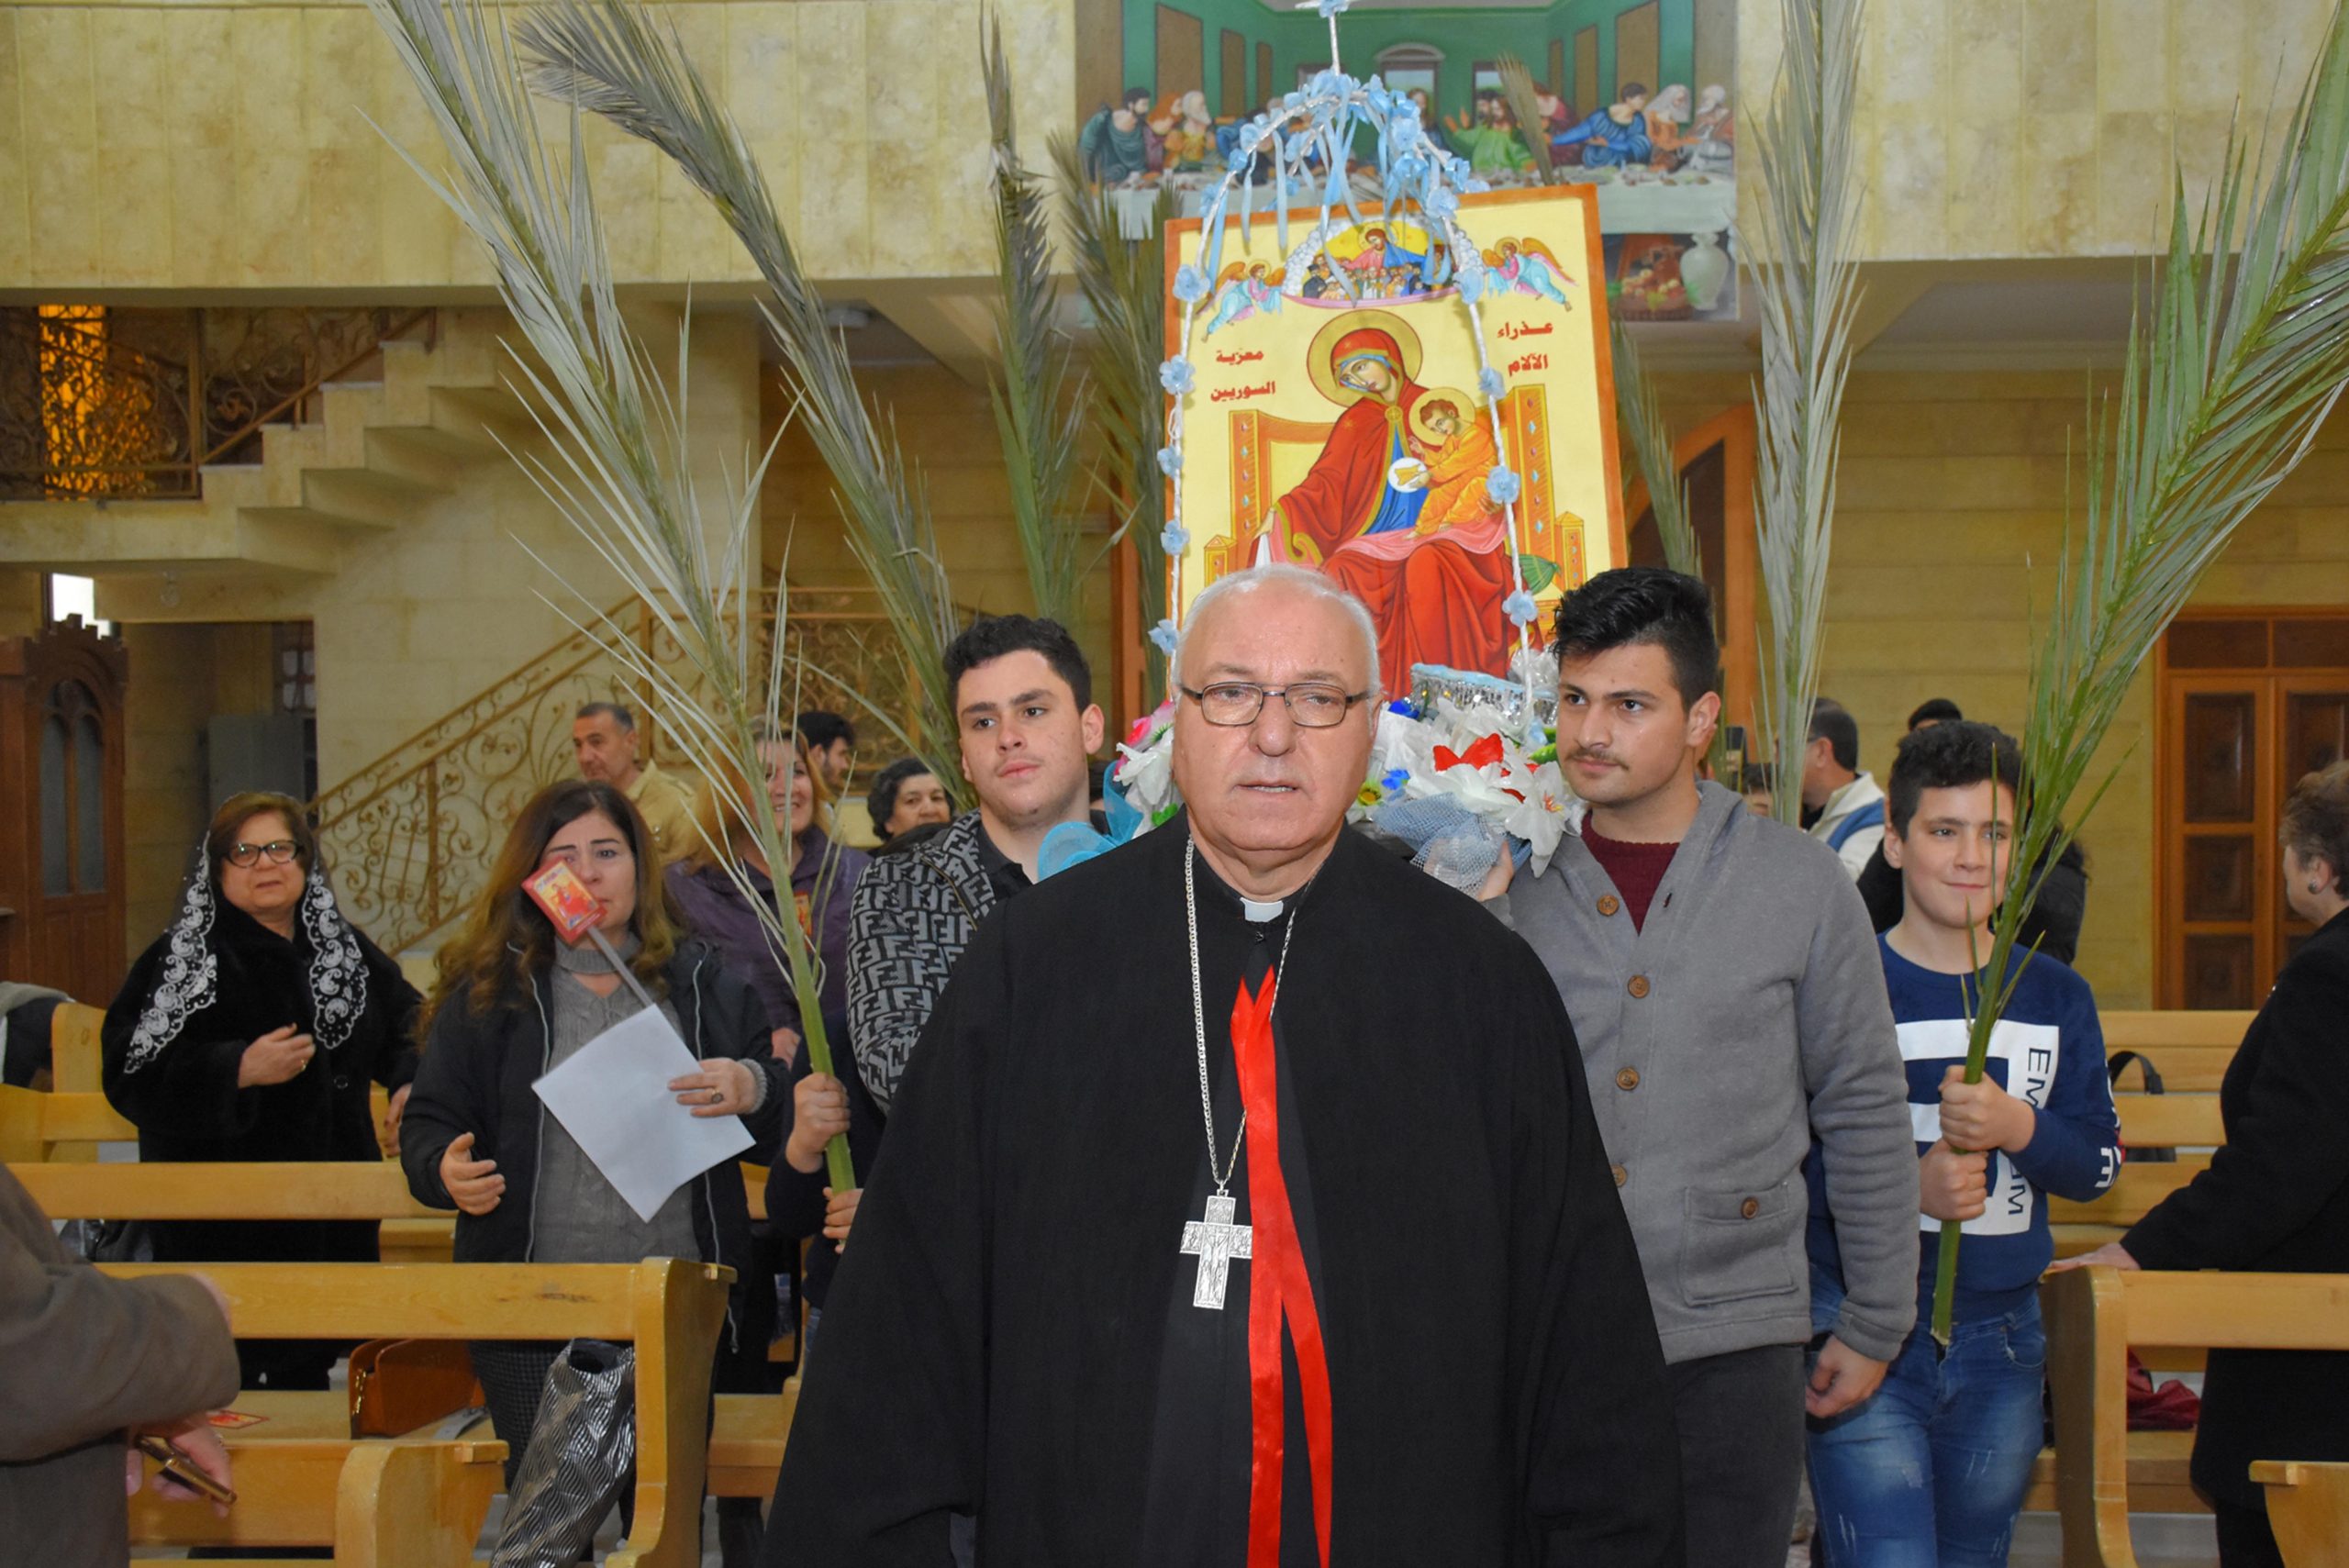 An icon procession is led by Chaldean Catholic Monsignor Nidal Thomas, Chaldean vicar of Hassake, north-east Syria